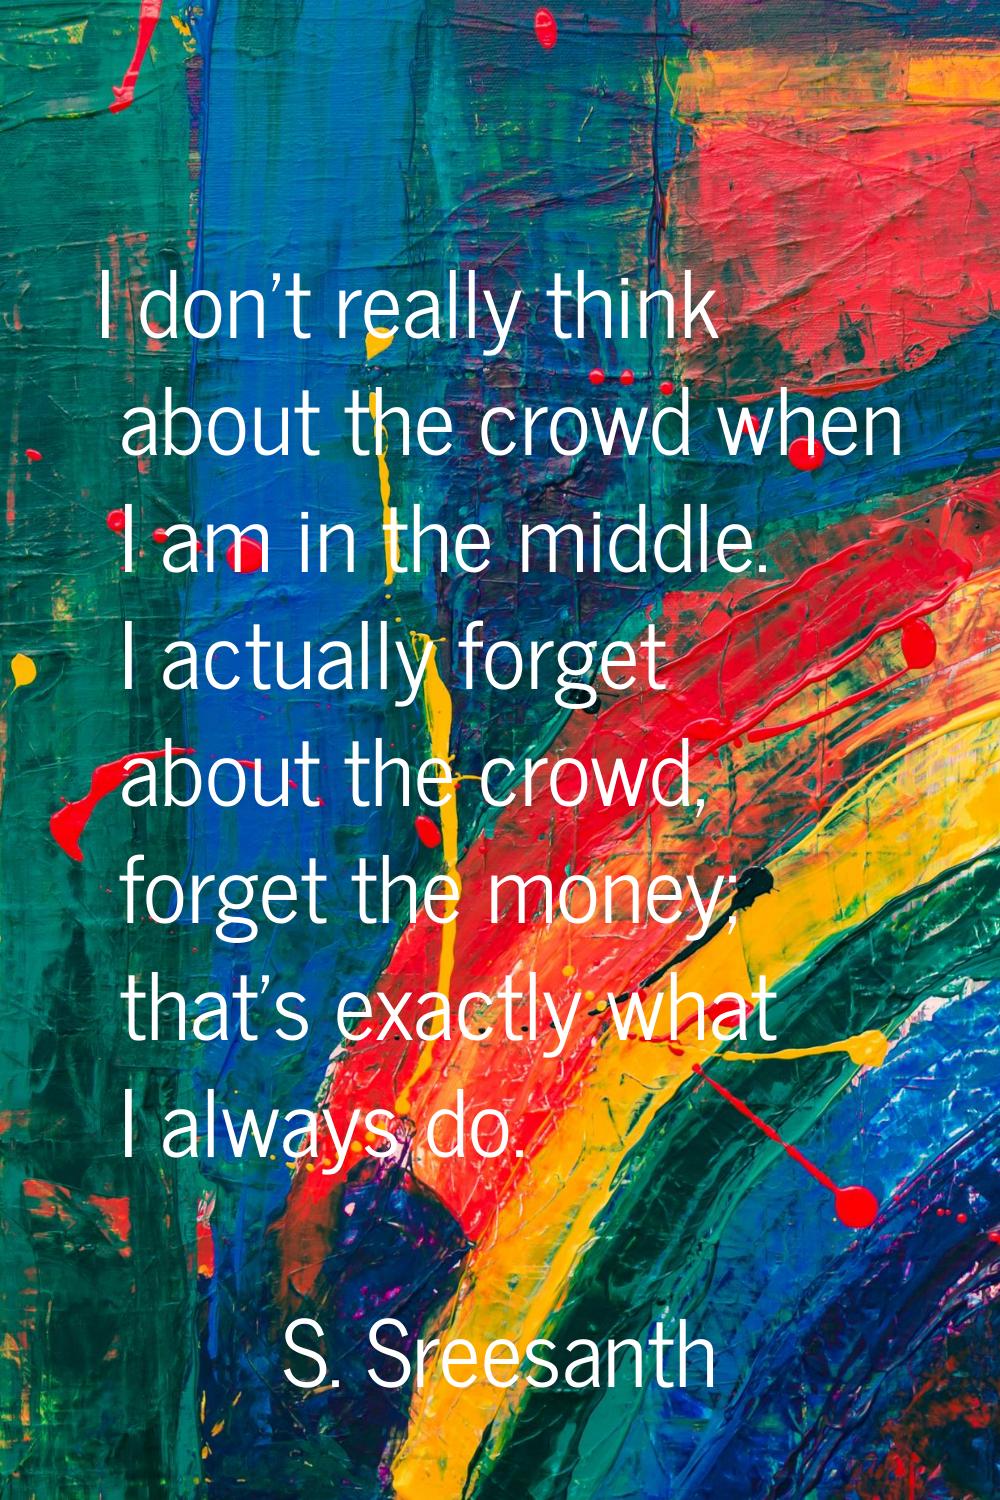 I don't really think about the crowd when I am in the middle. I actually forget about the crowd, fo